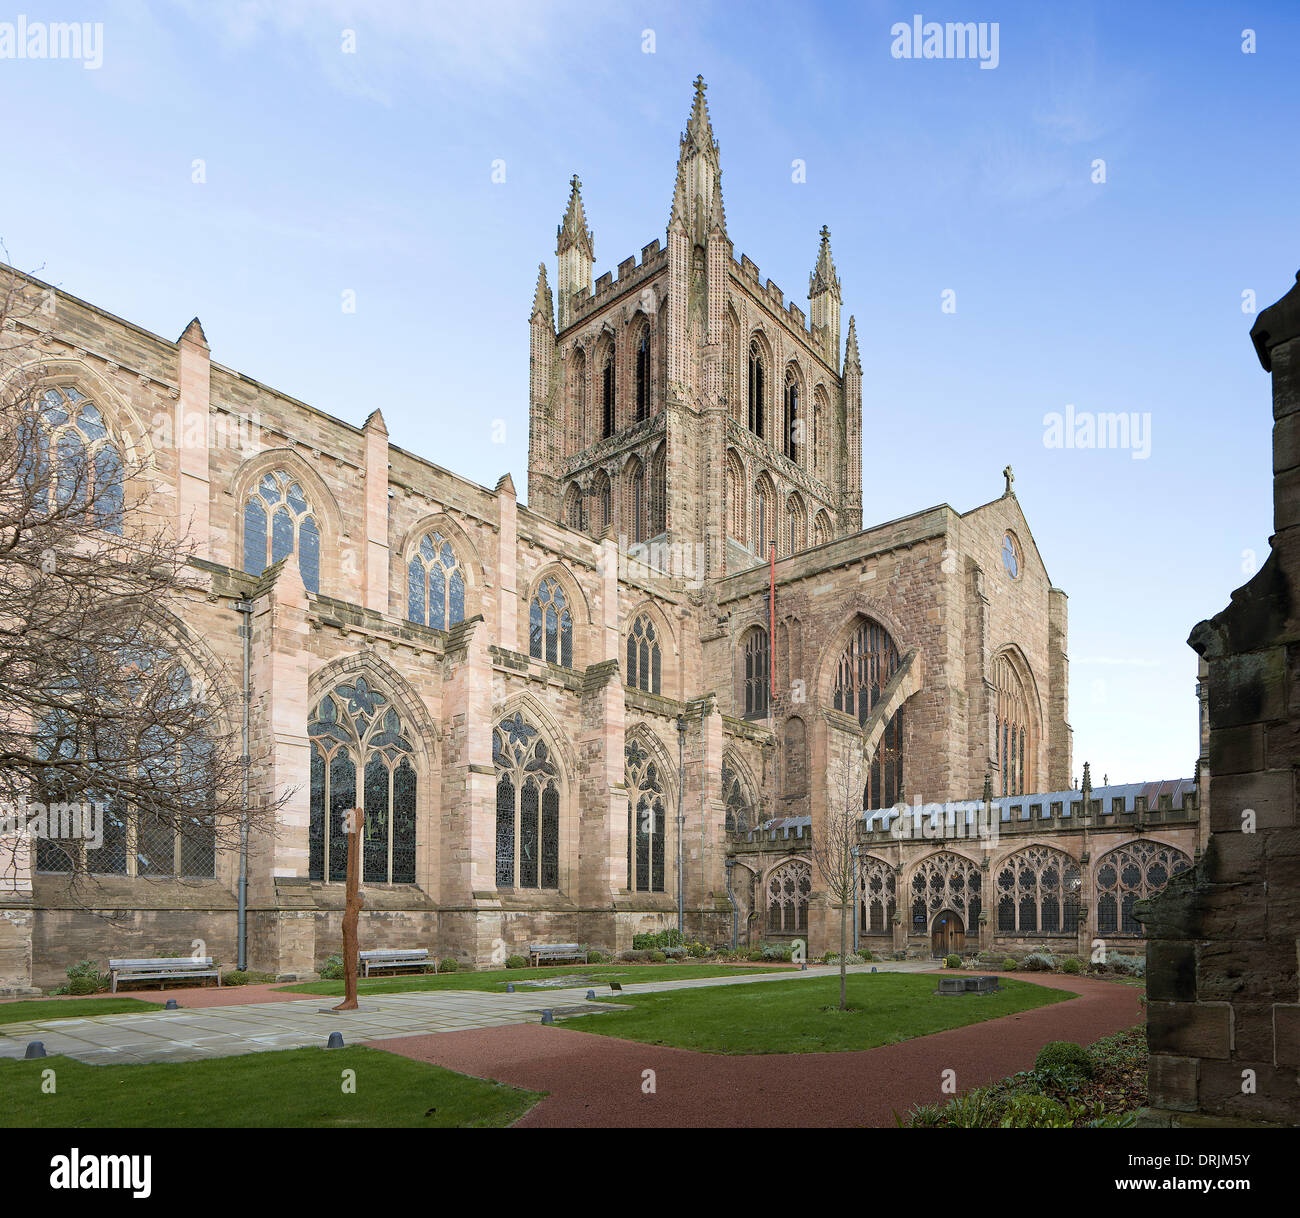 Hereford Cathedral, Hereford, Herefordshire, England, UK Stock Photo